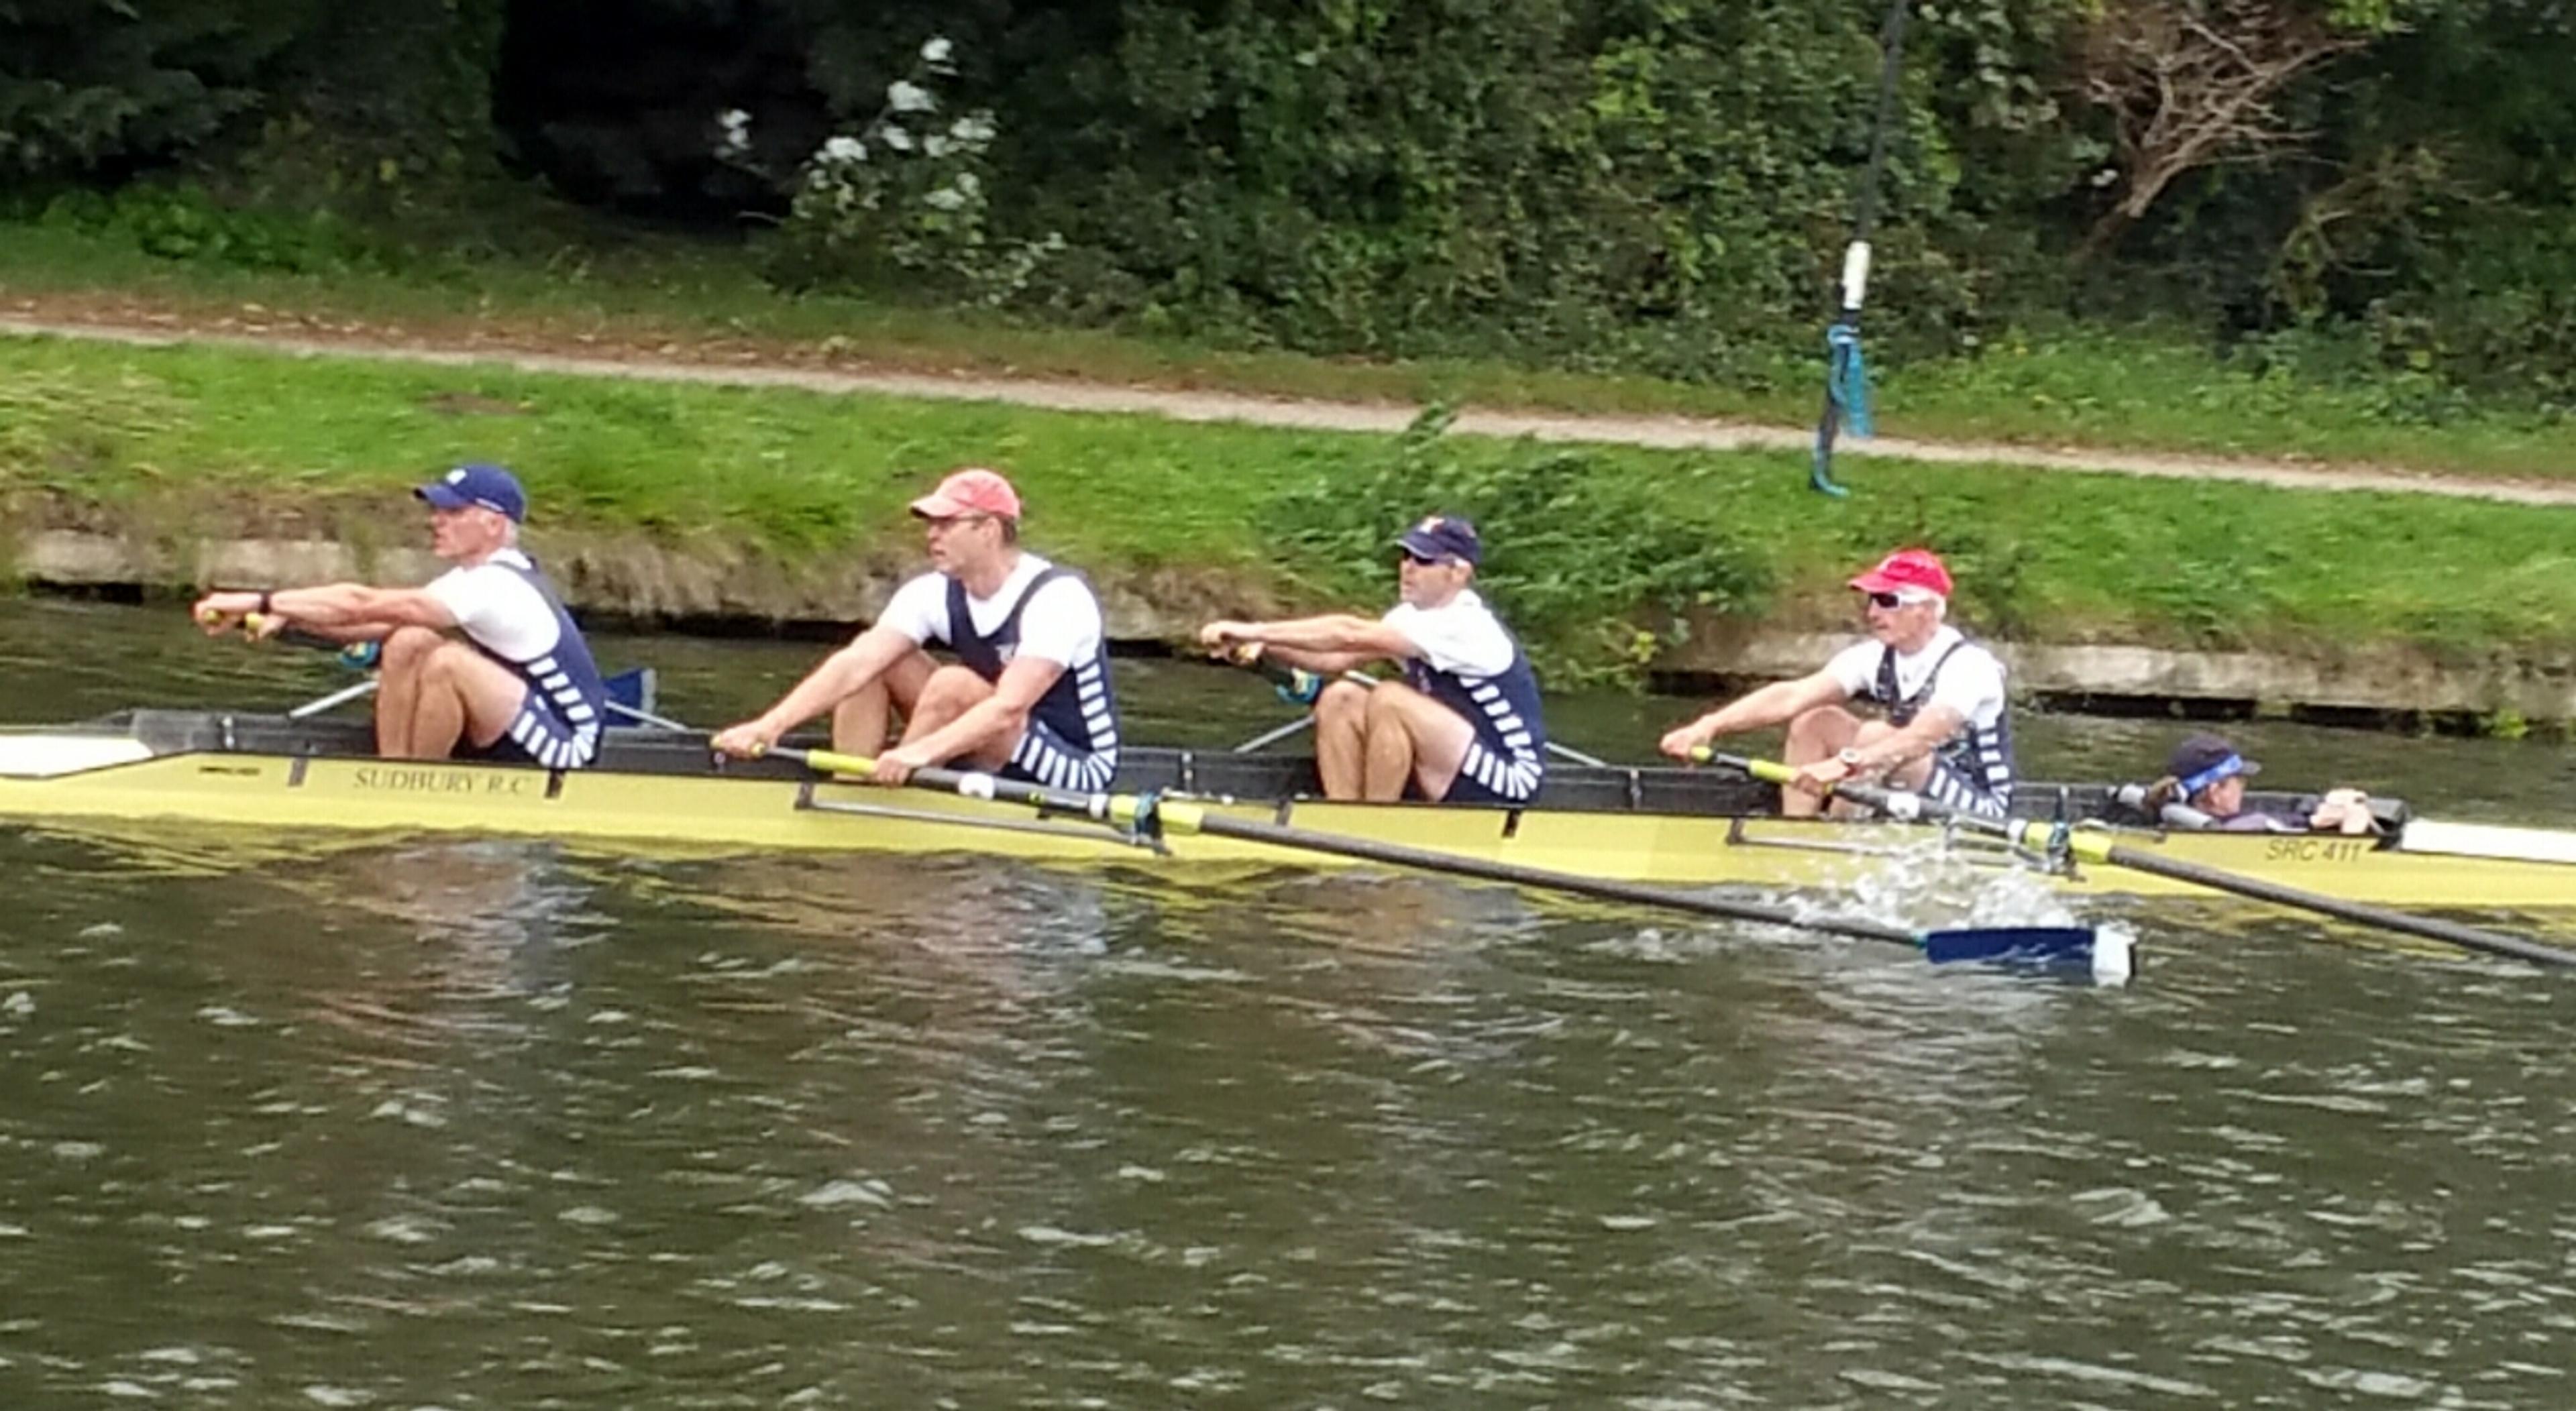 The successful men’s quad at full steam during a race.